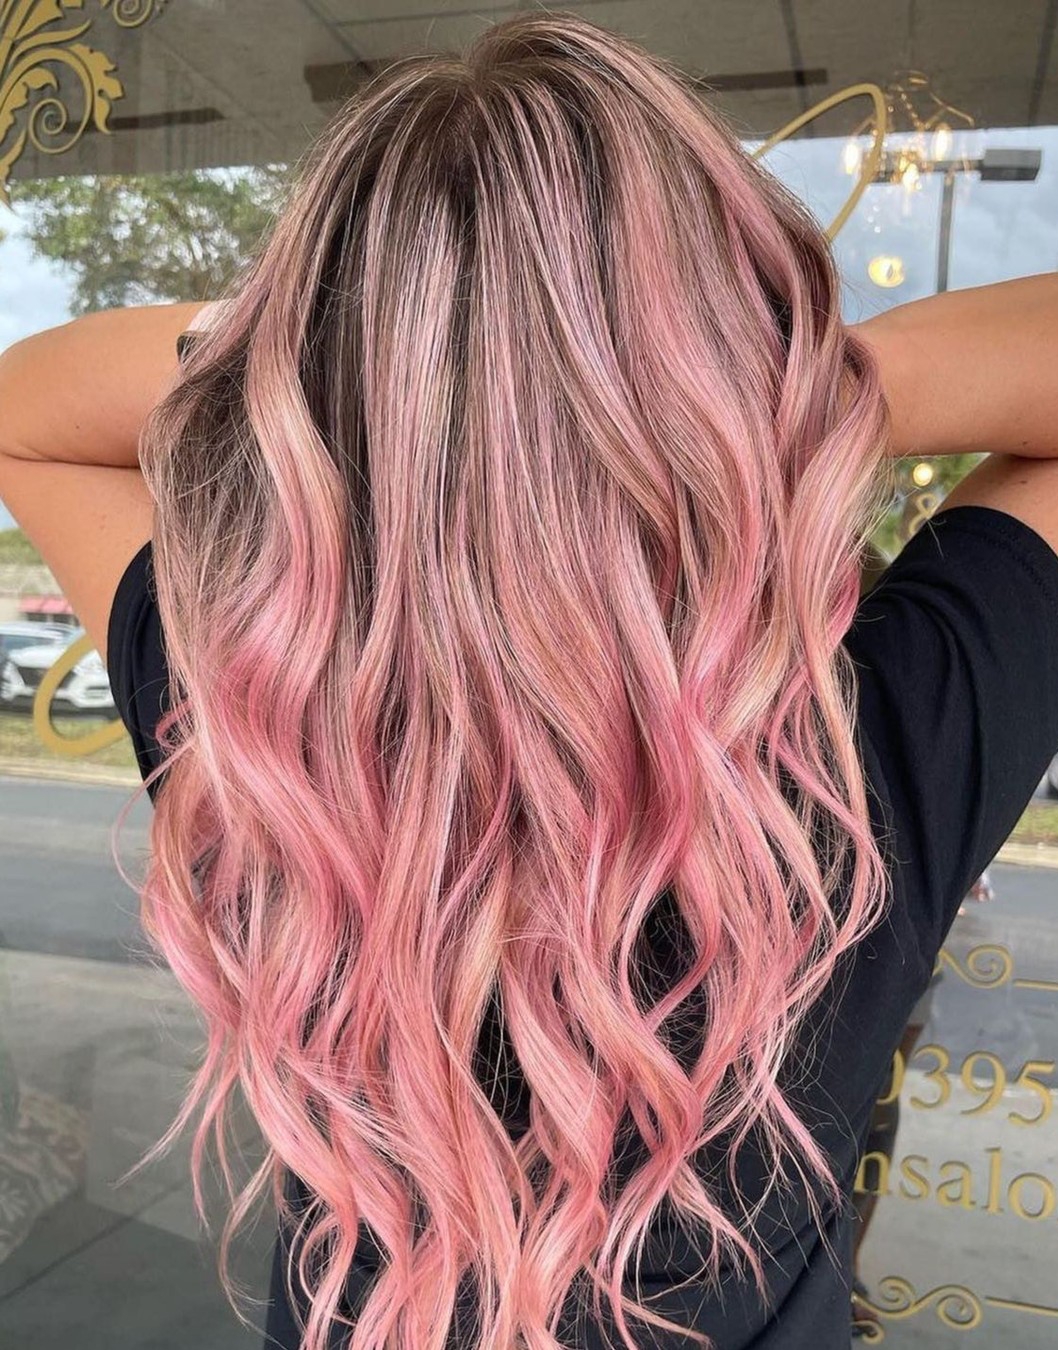 Rose Gold Hair with Pink Highlights